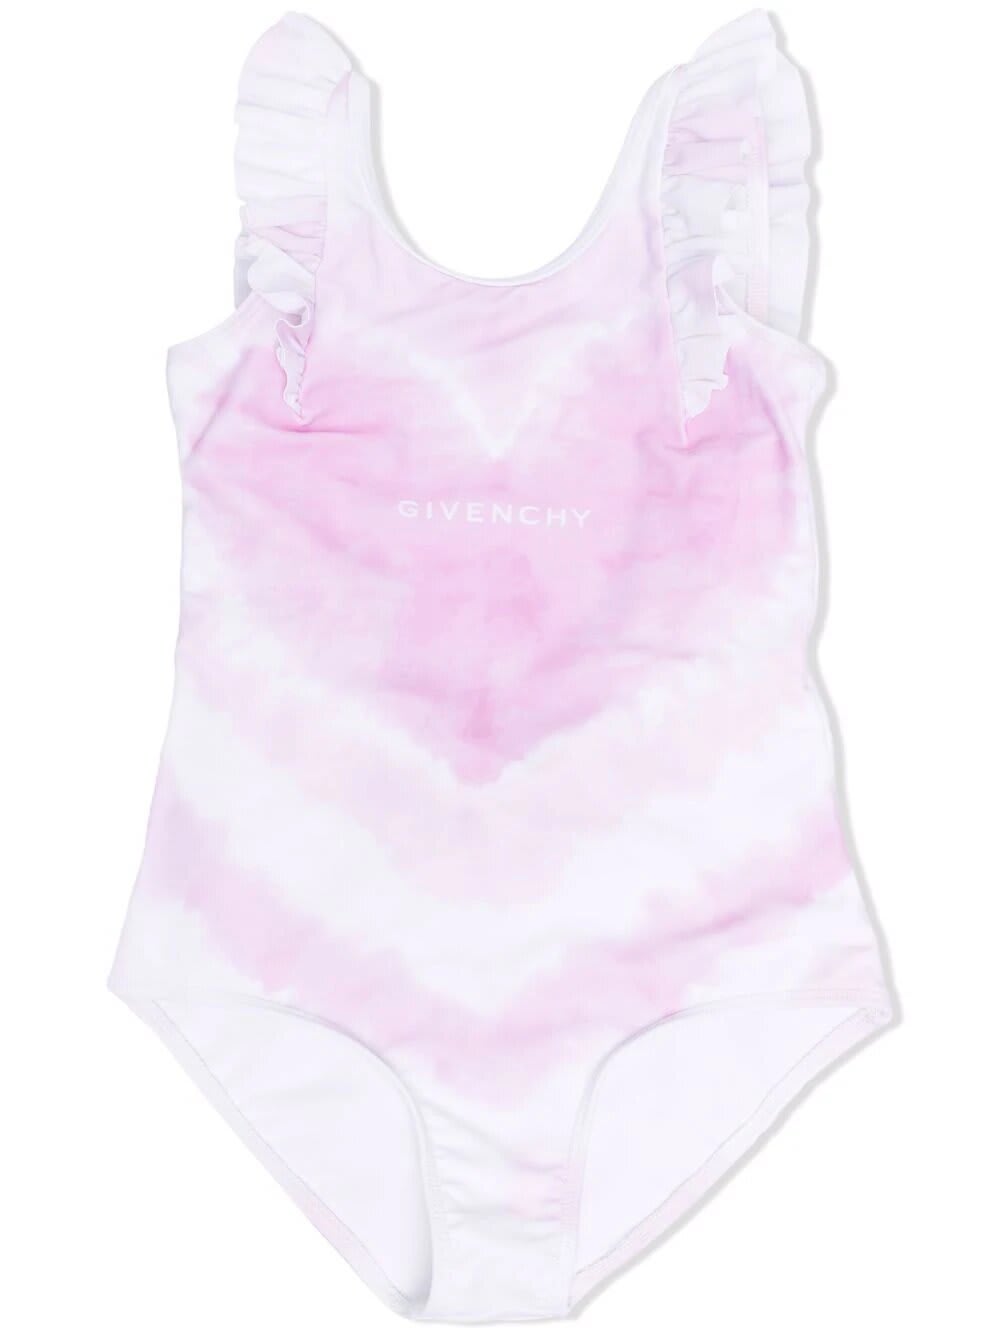 Kids One-piece Swimsuit With Givenchy Tie-dye Heart Print